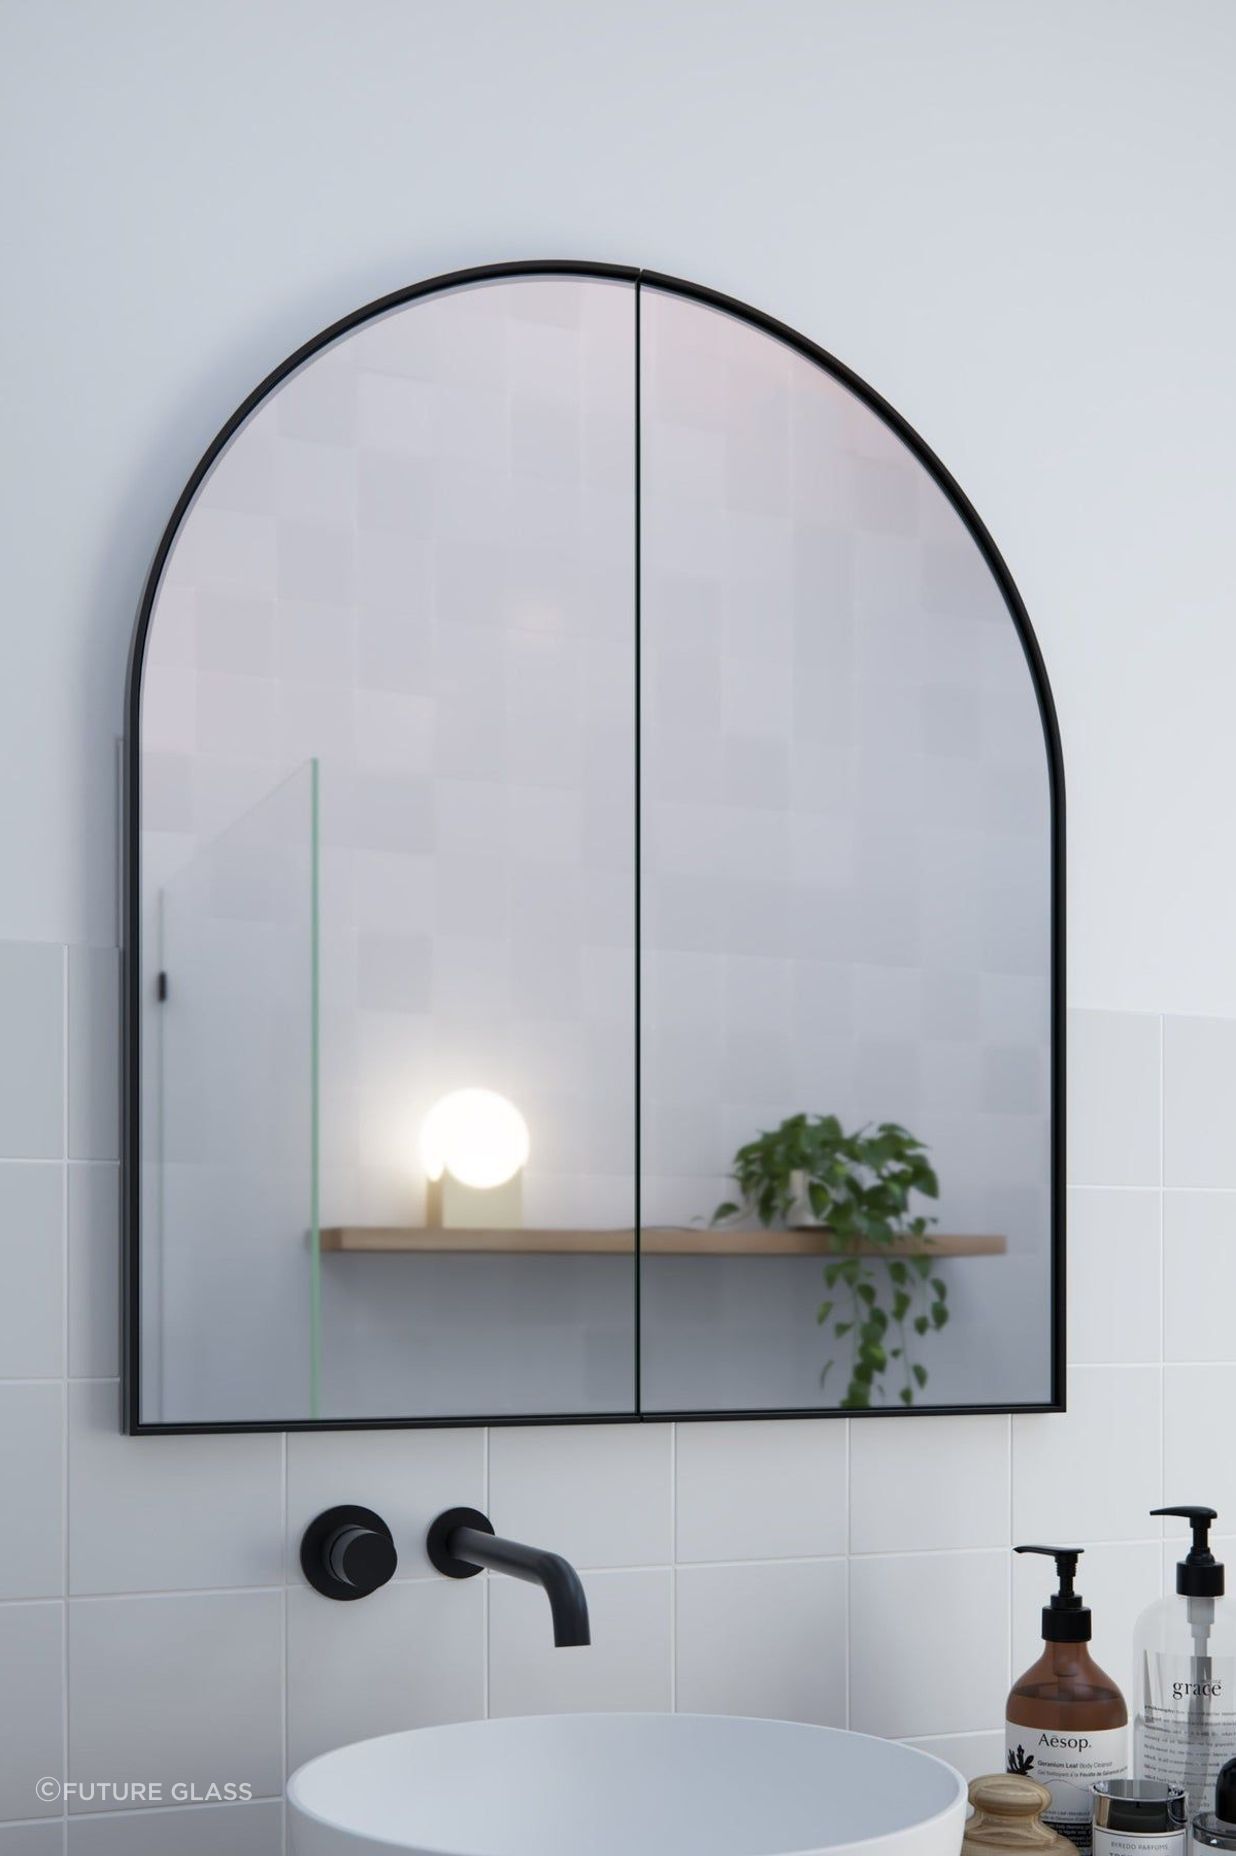 This arch mirror suits Mediterranean style bathrooms. Featured product: Arch Mirror Cabinet